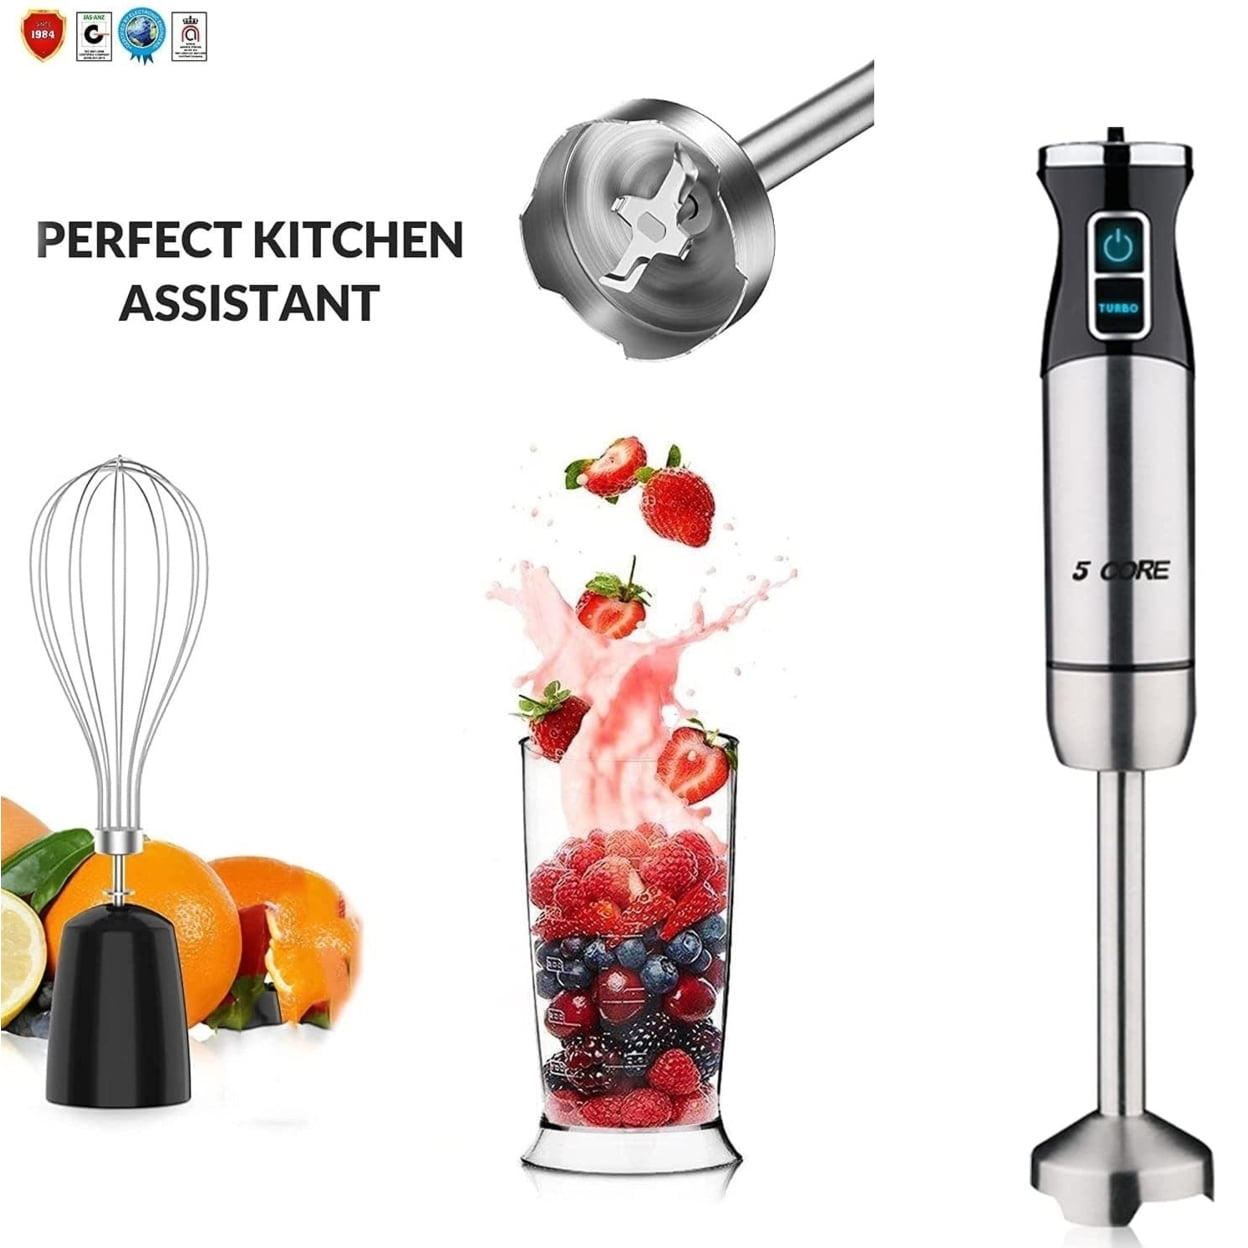 5 Core Immersion Hand Blender 500W Multifunctional Powerful Electric  Handheld Blender 8 Variable speed Emersion Hand Mixer Stick BPA Free HB  1510 RED